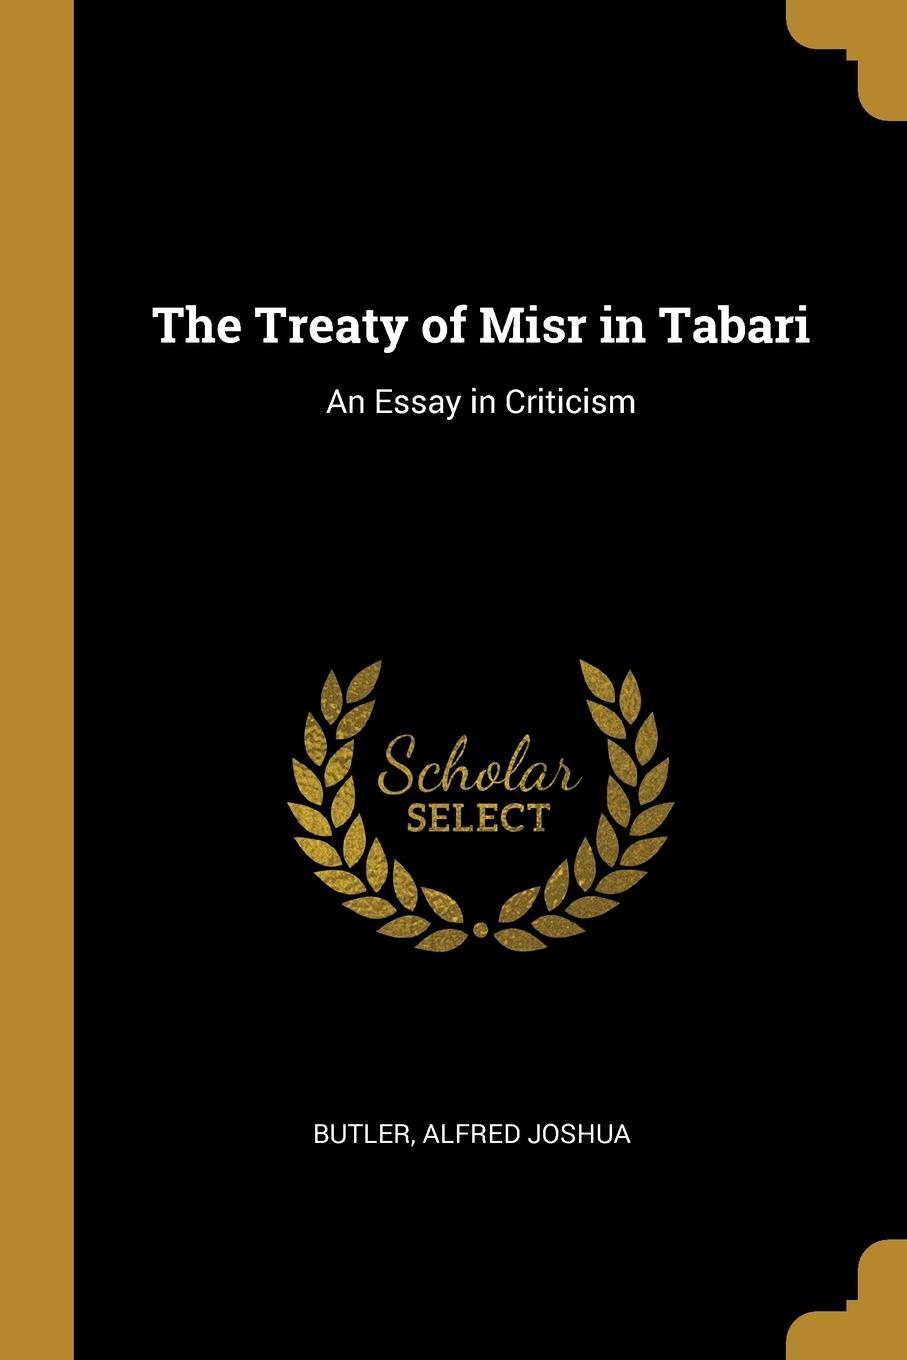 The Treaty of Misr in Tabari. An Essay in Criticism